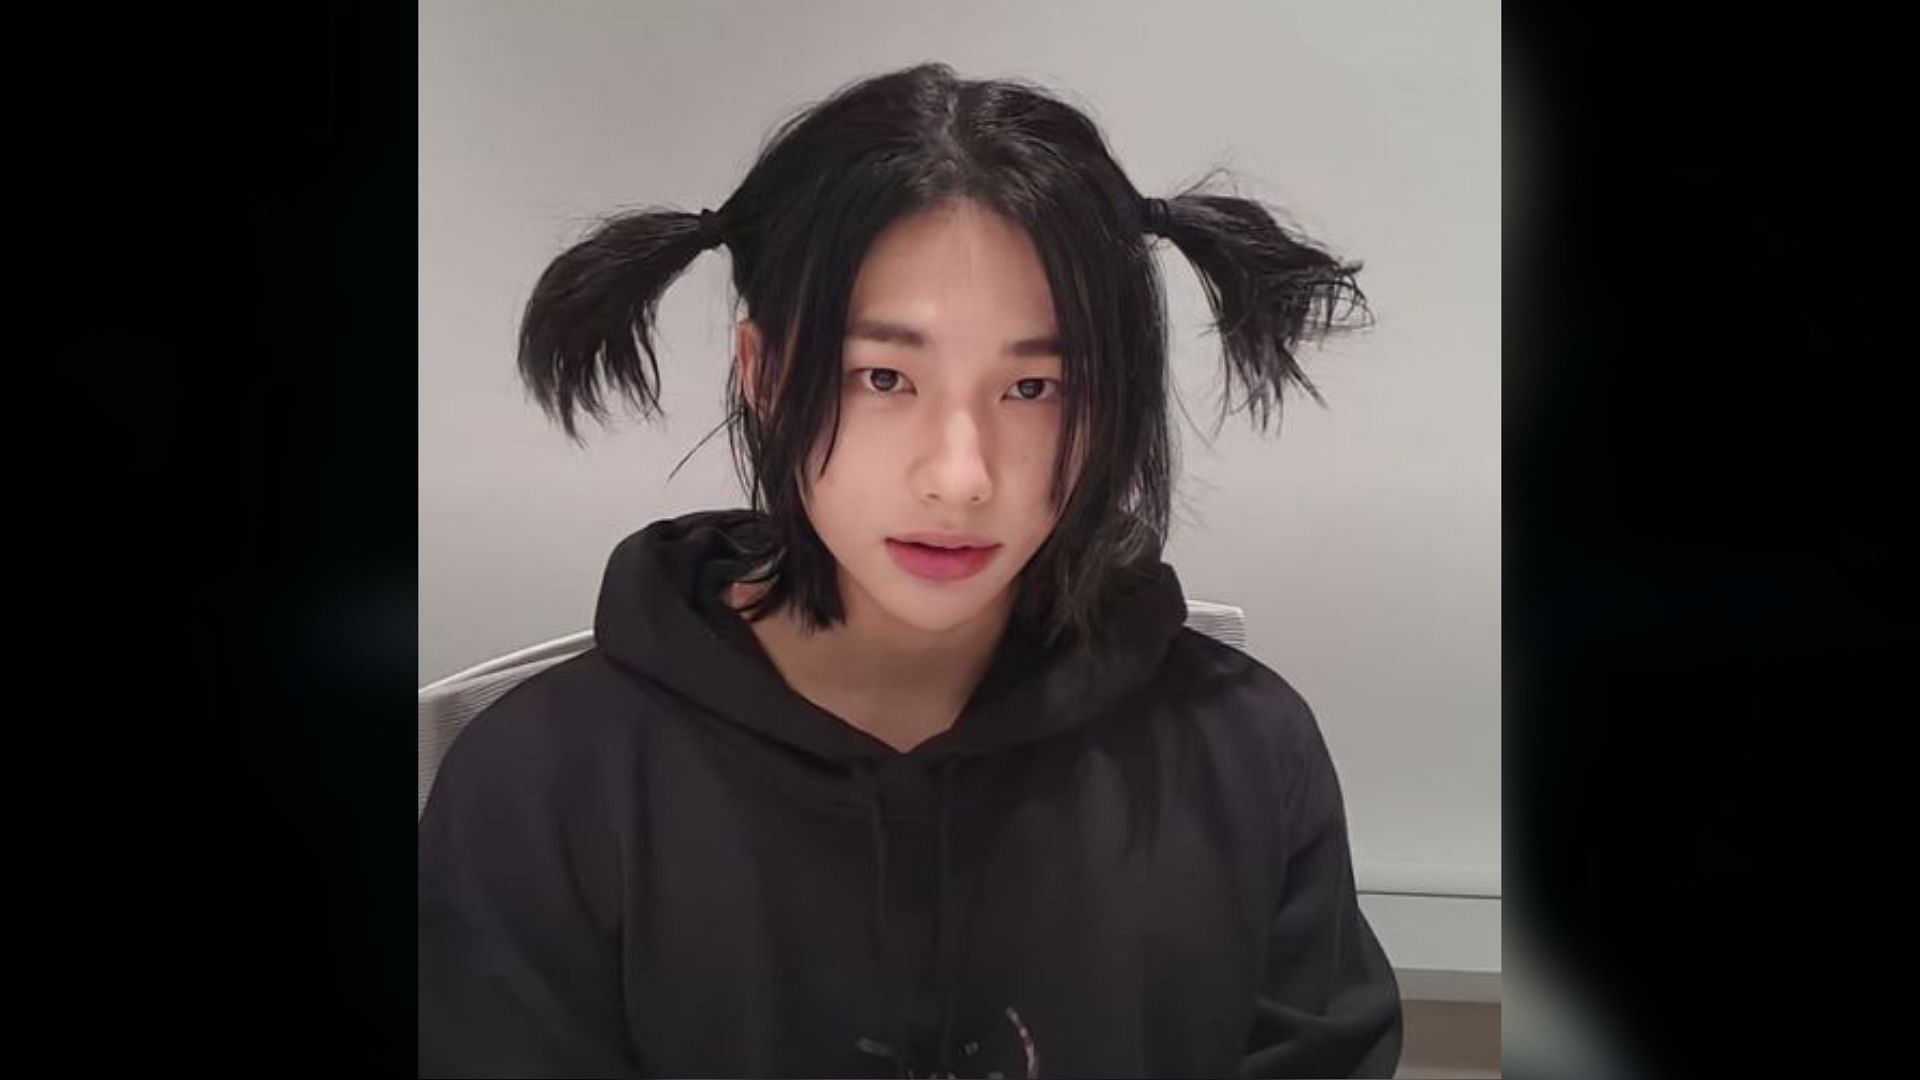 Stray Kids' Hyunjin proved he can rock any hairstyle